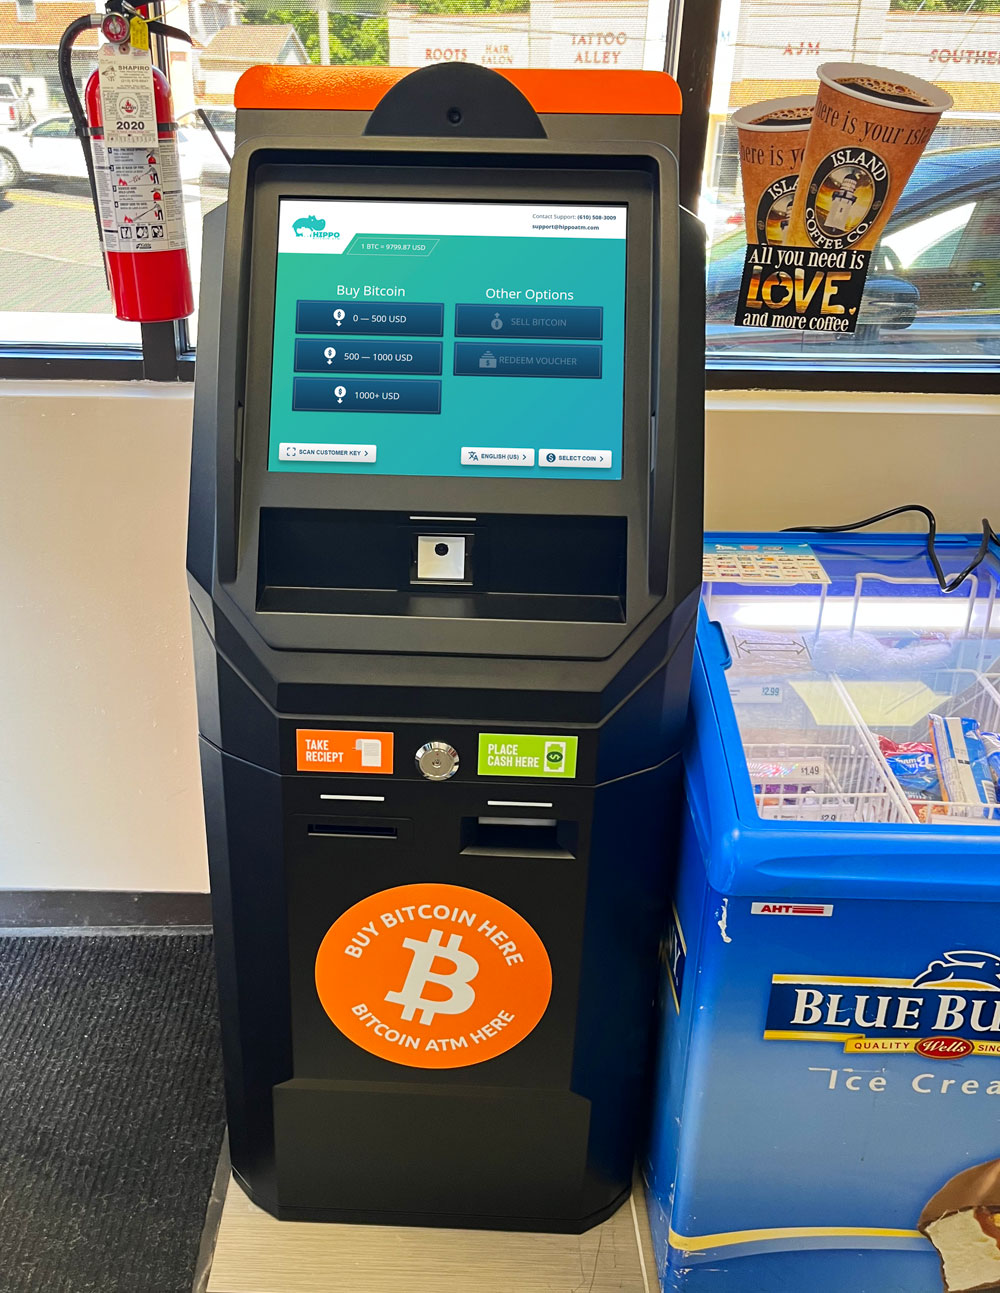 Best place to put Bitcoin ATM - BTC ATMs placement strategy